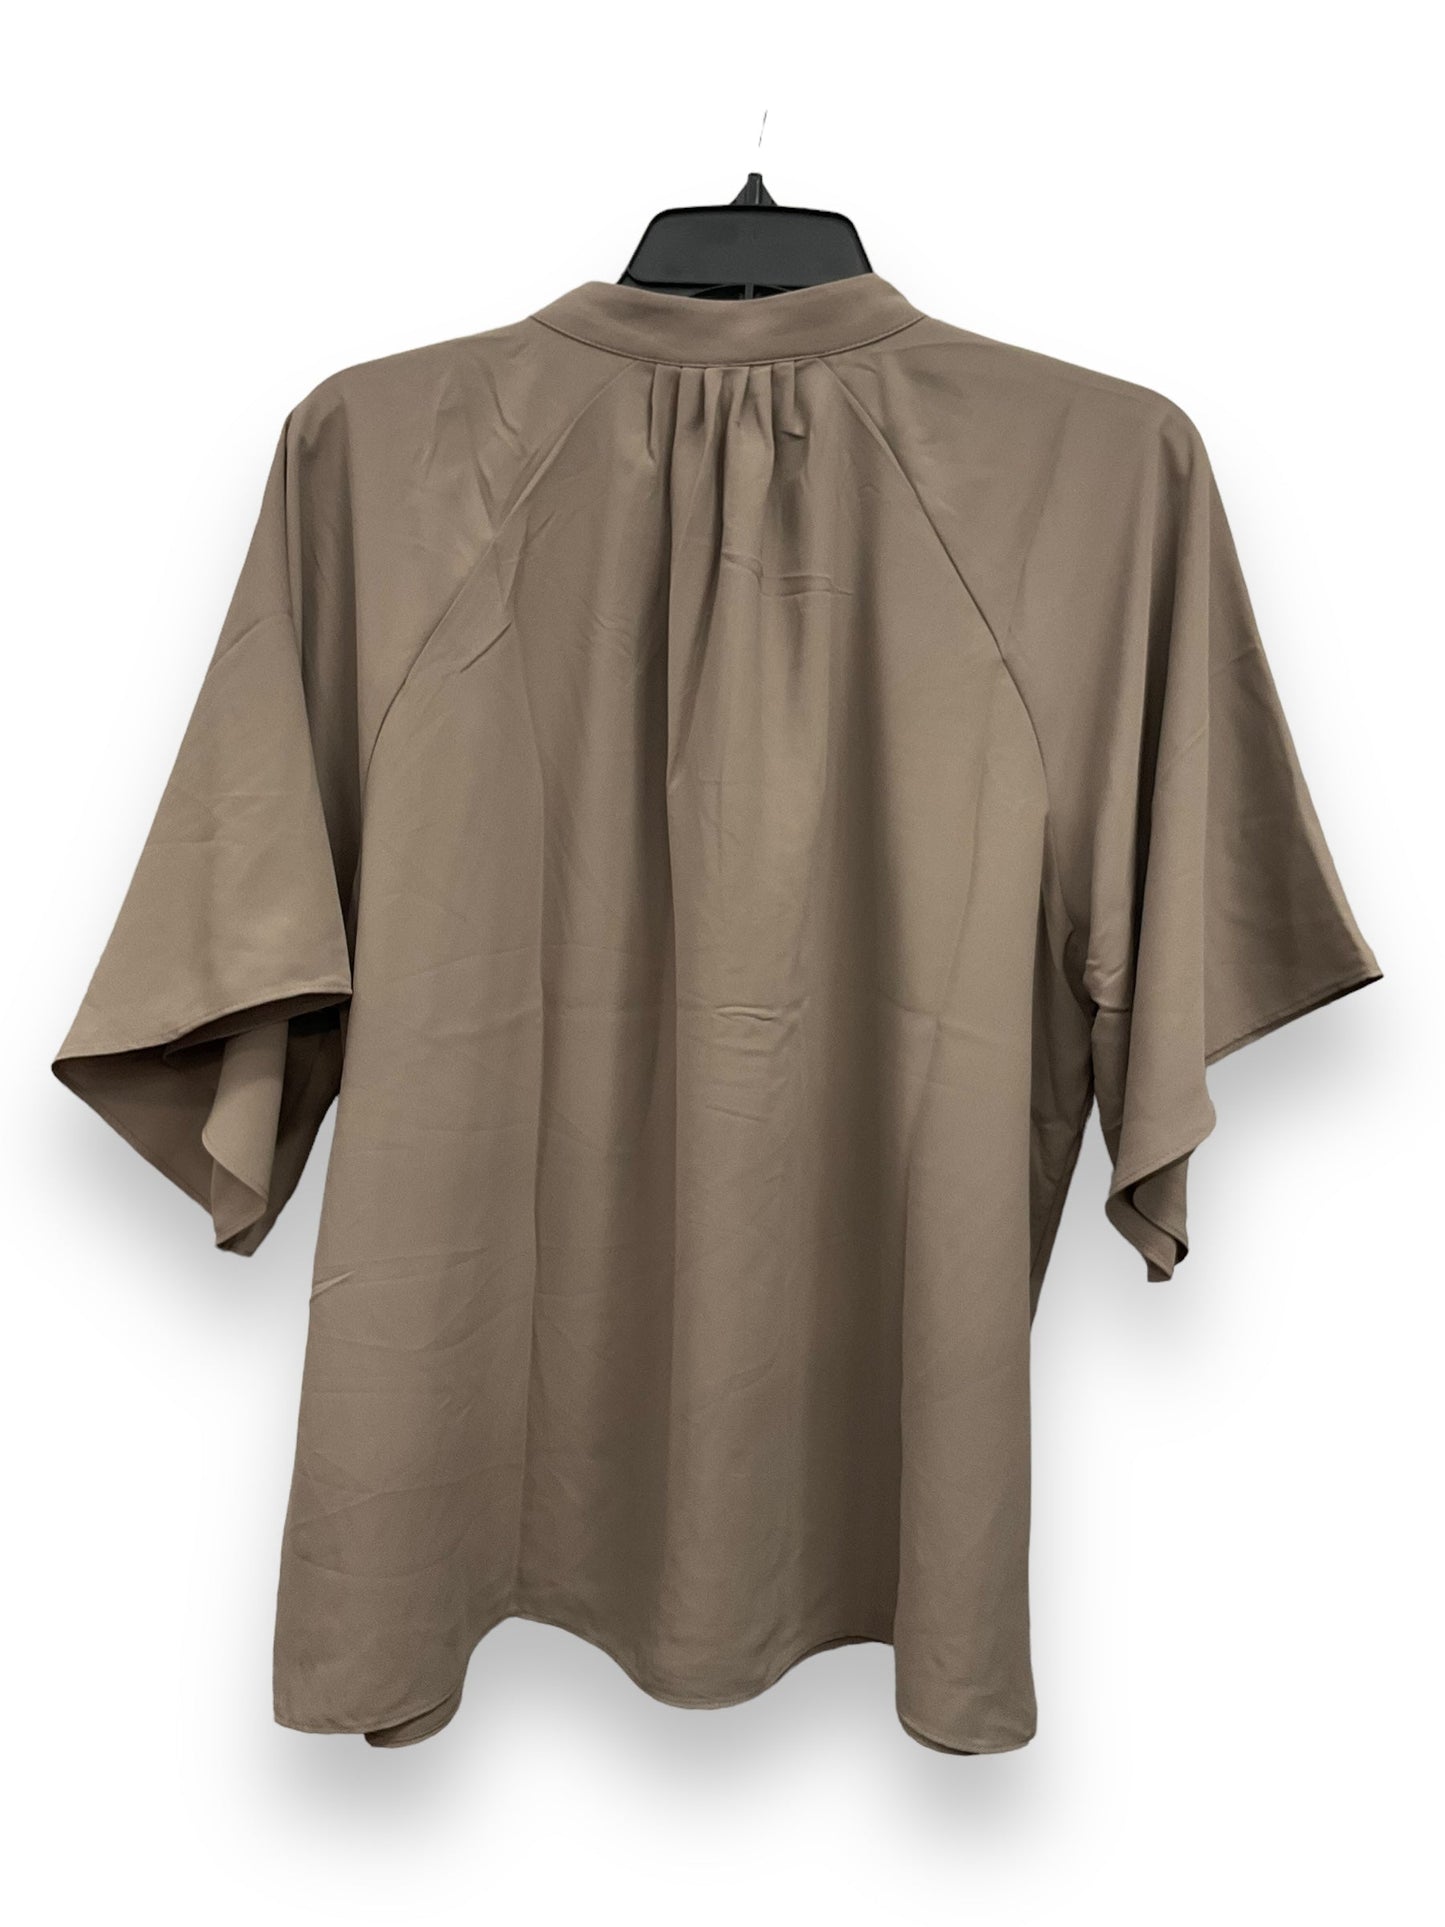 Taupe Blouse Short Sleeve H&m, Size S